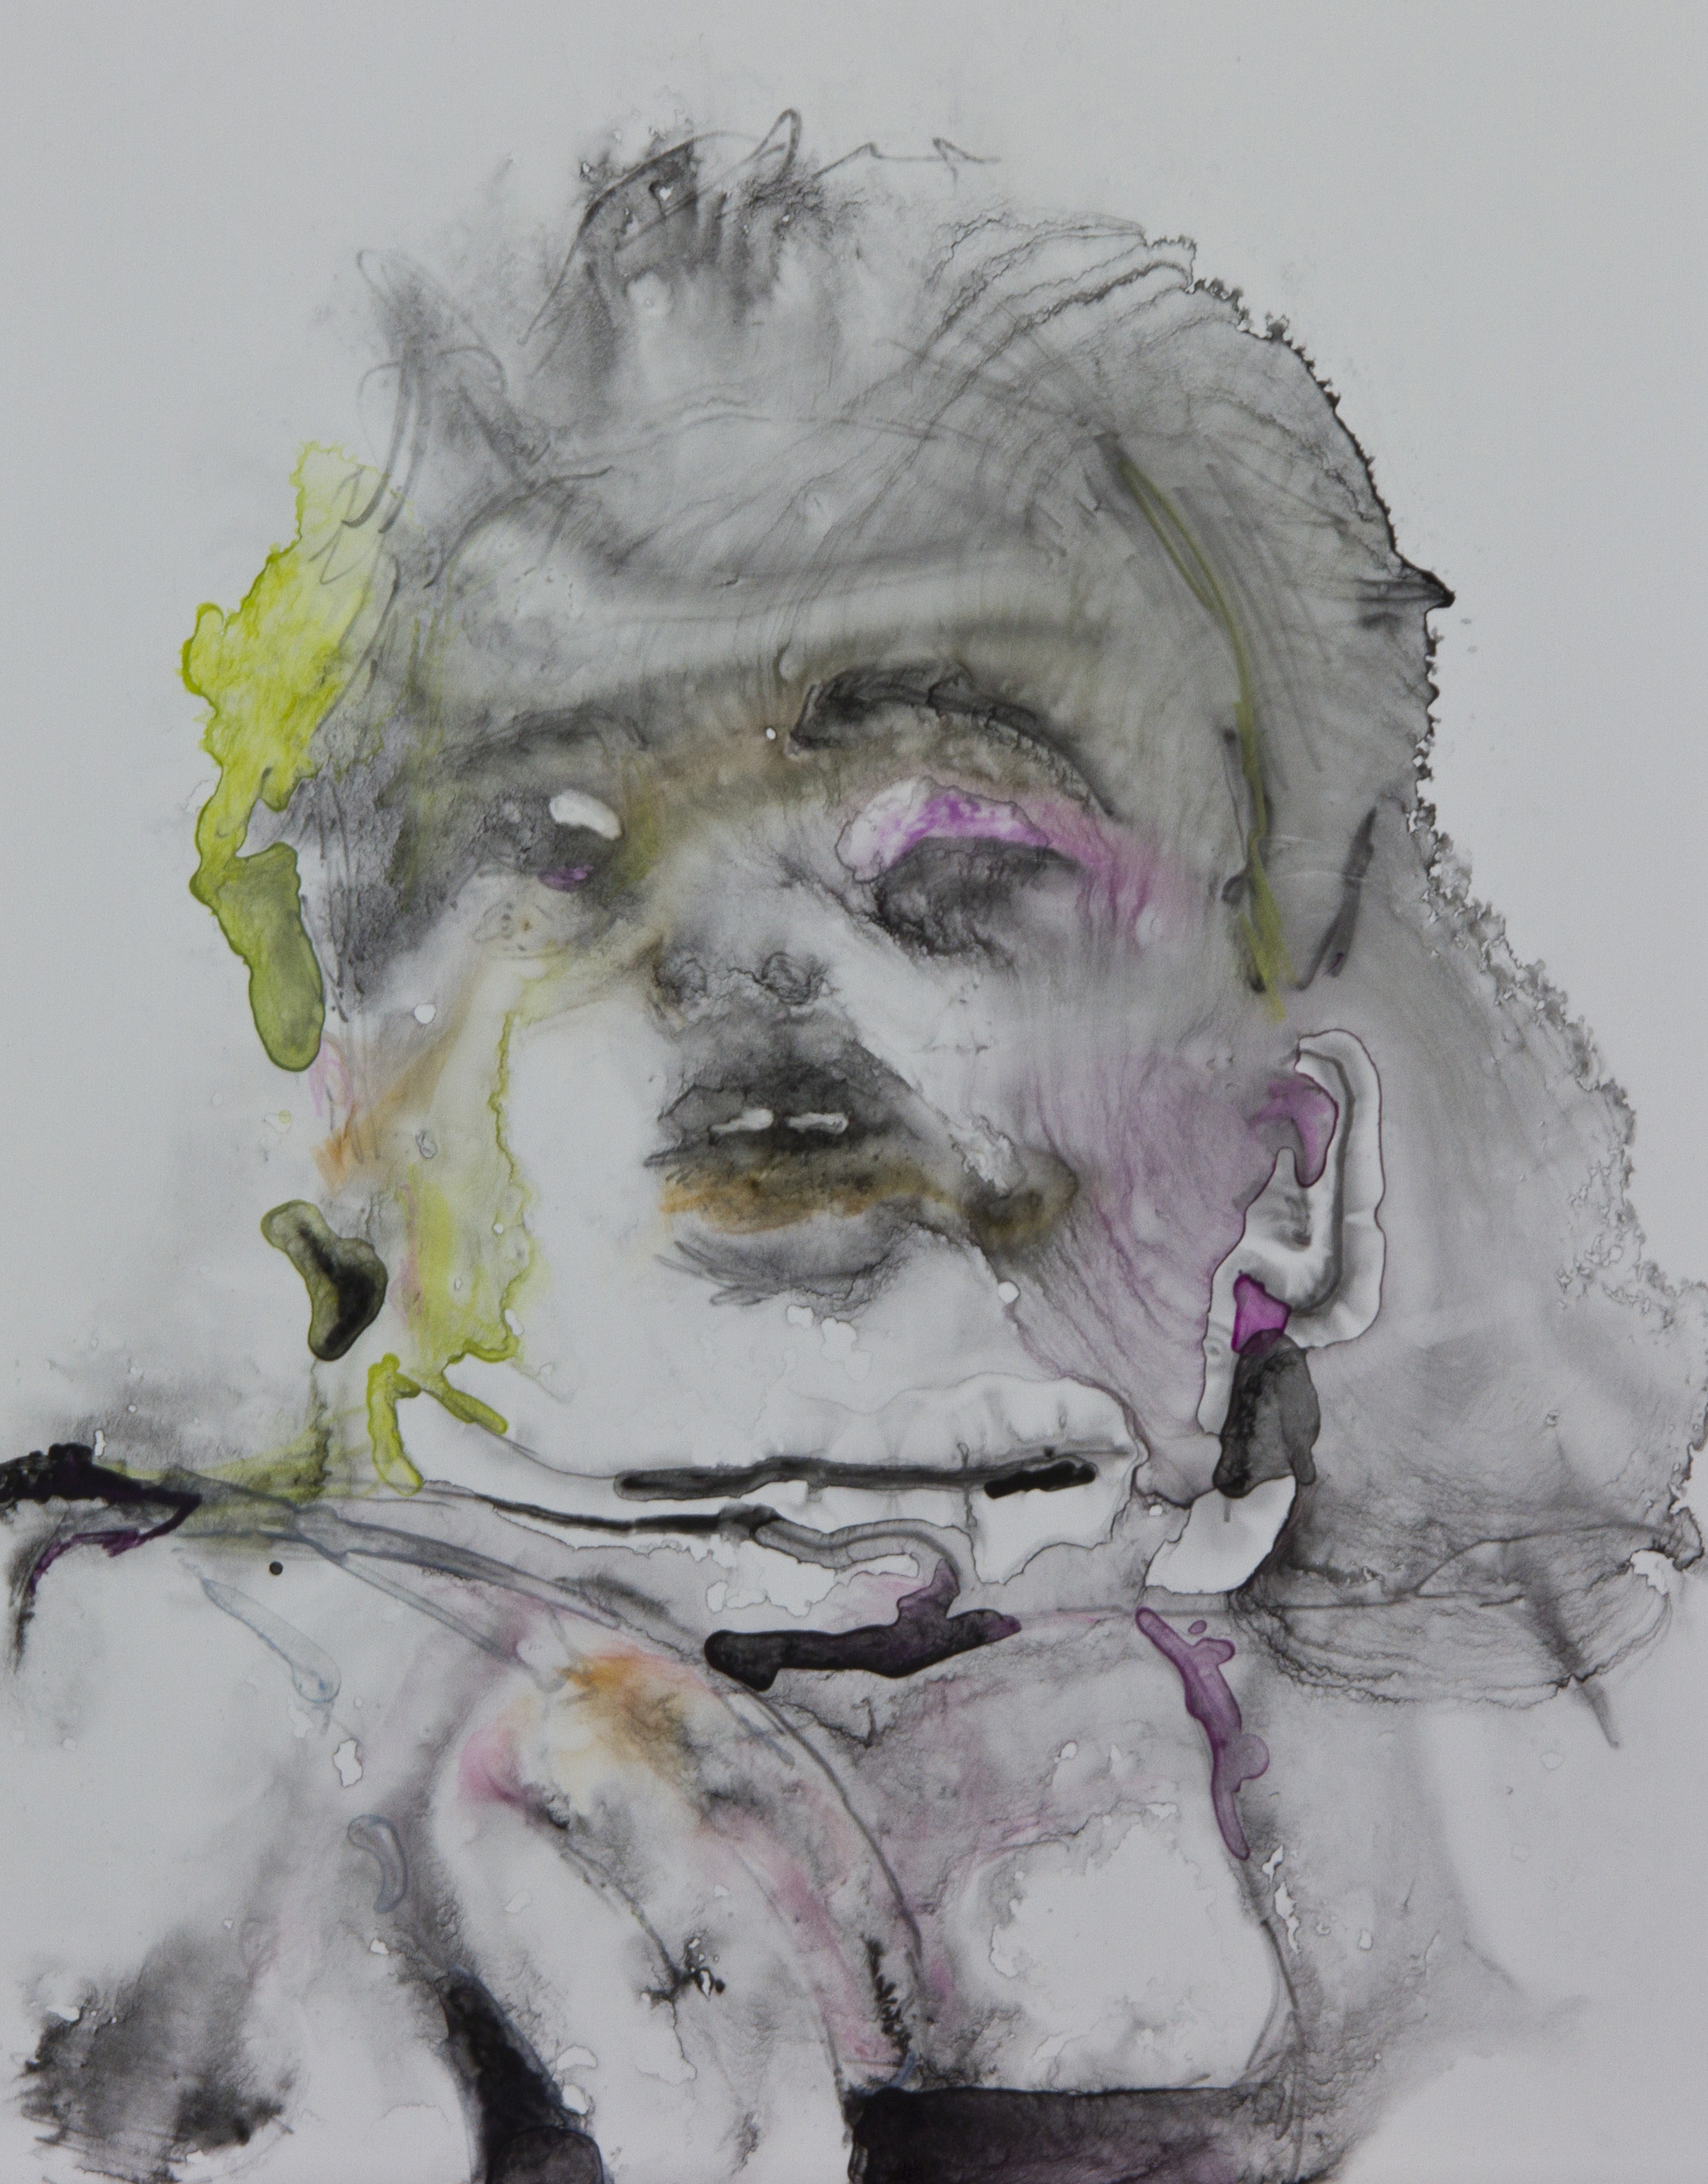 Changed So Drastically, 2011, watercolor on polypropylene, 11x14 inches